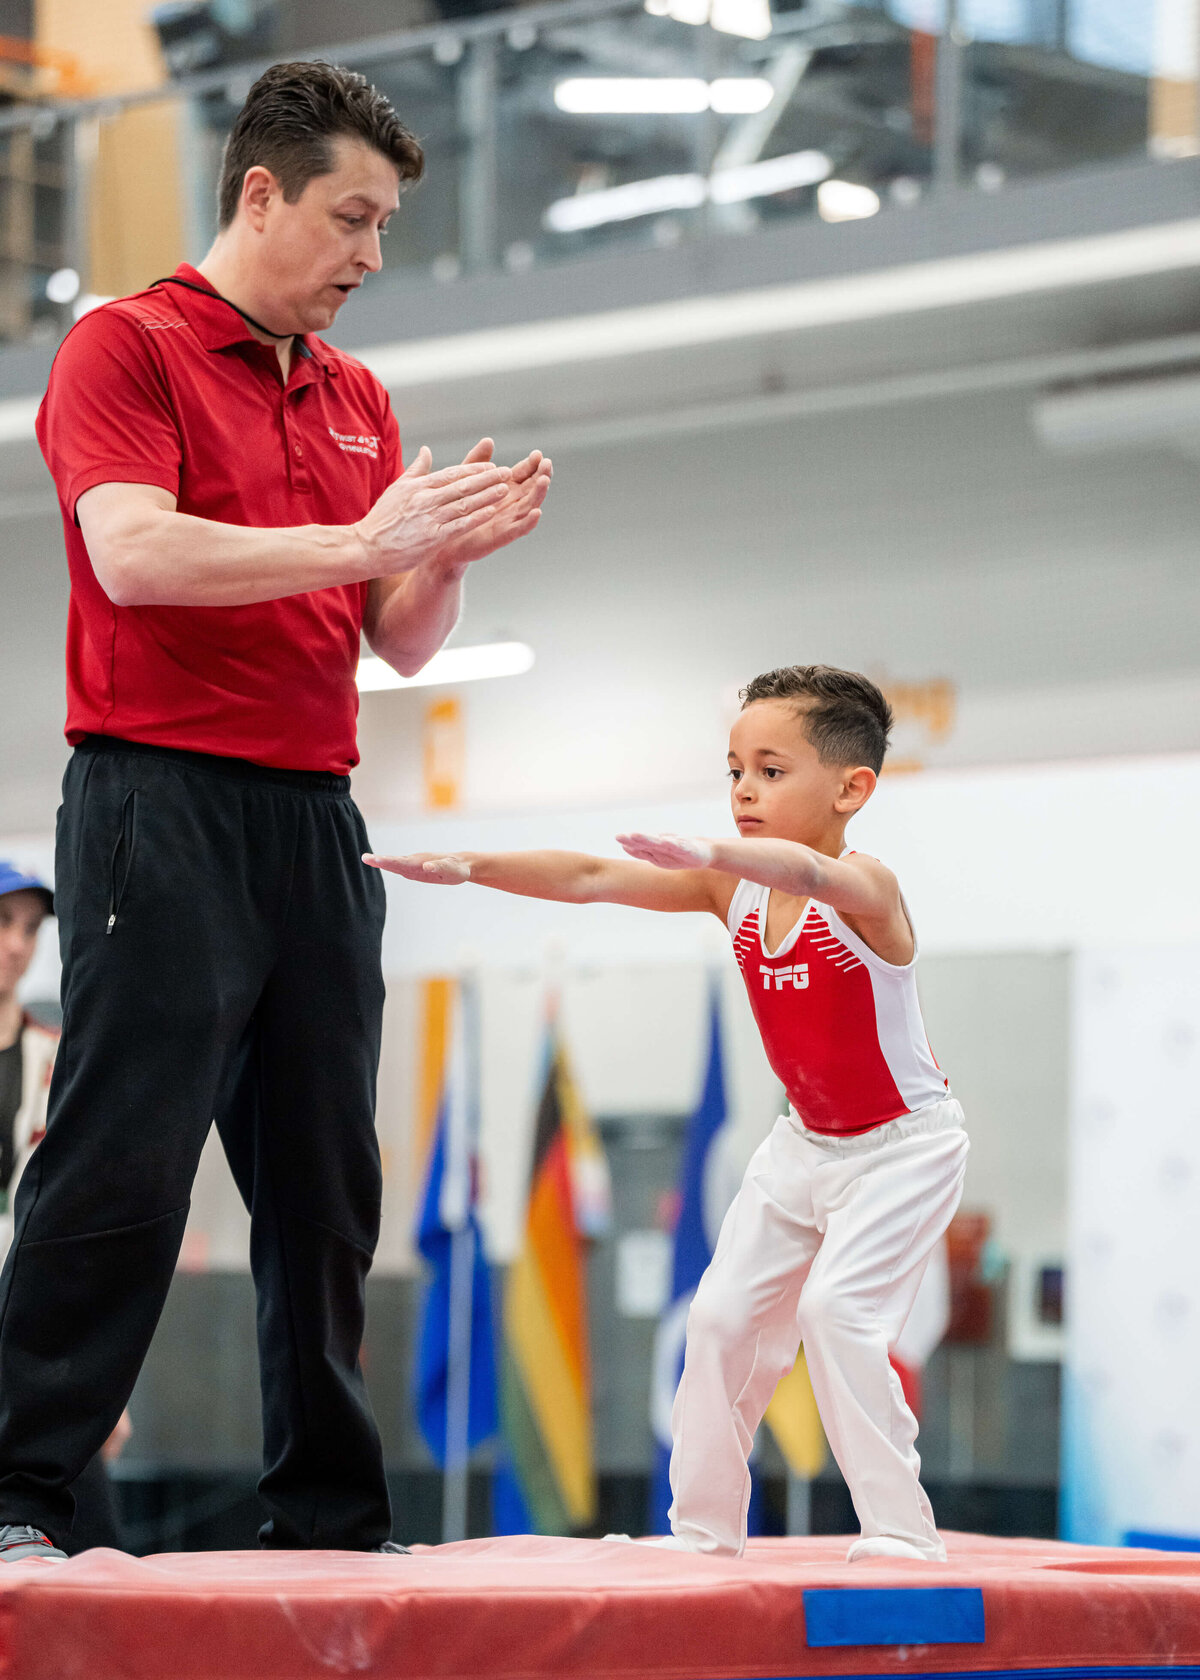 Photo by Luke O'Geil taken at the 2023 inaugural Grizzly Classic men's artistic gymnastics competitionA1_06600